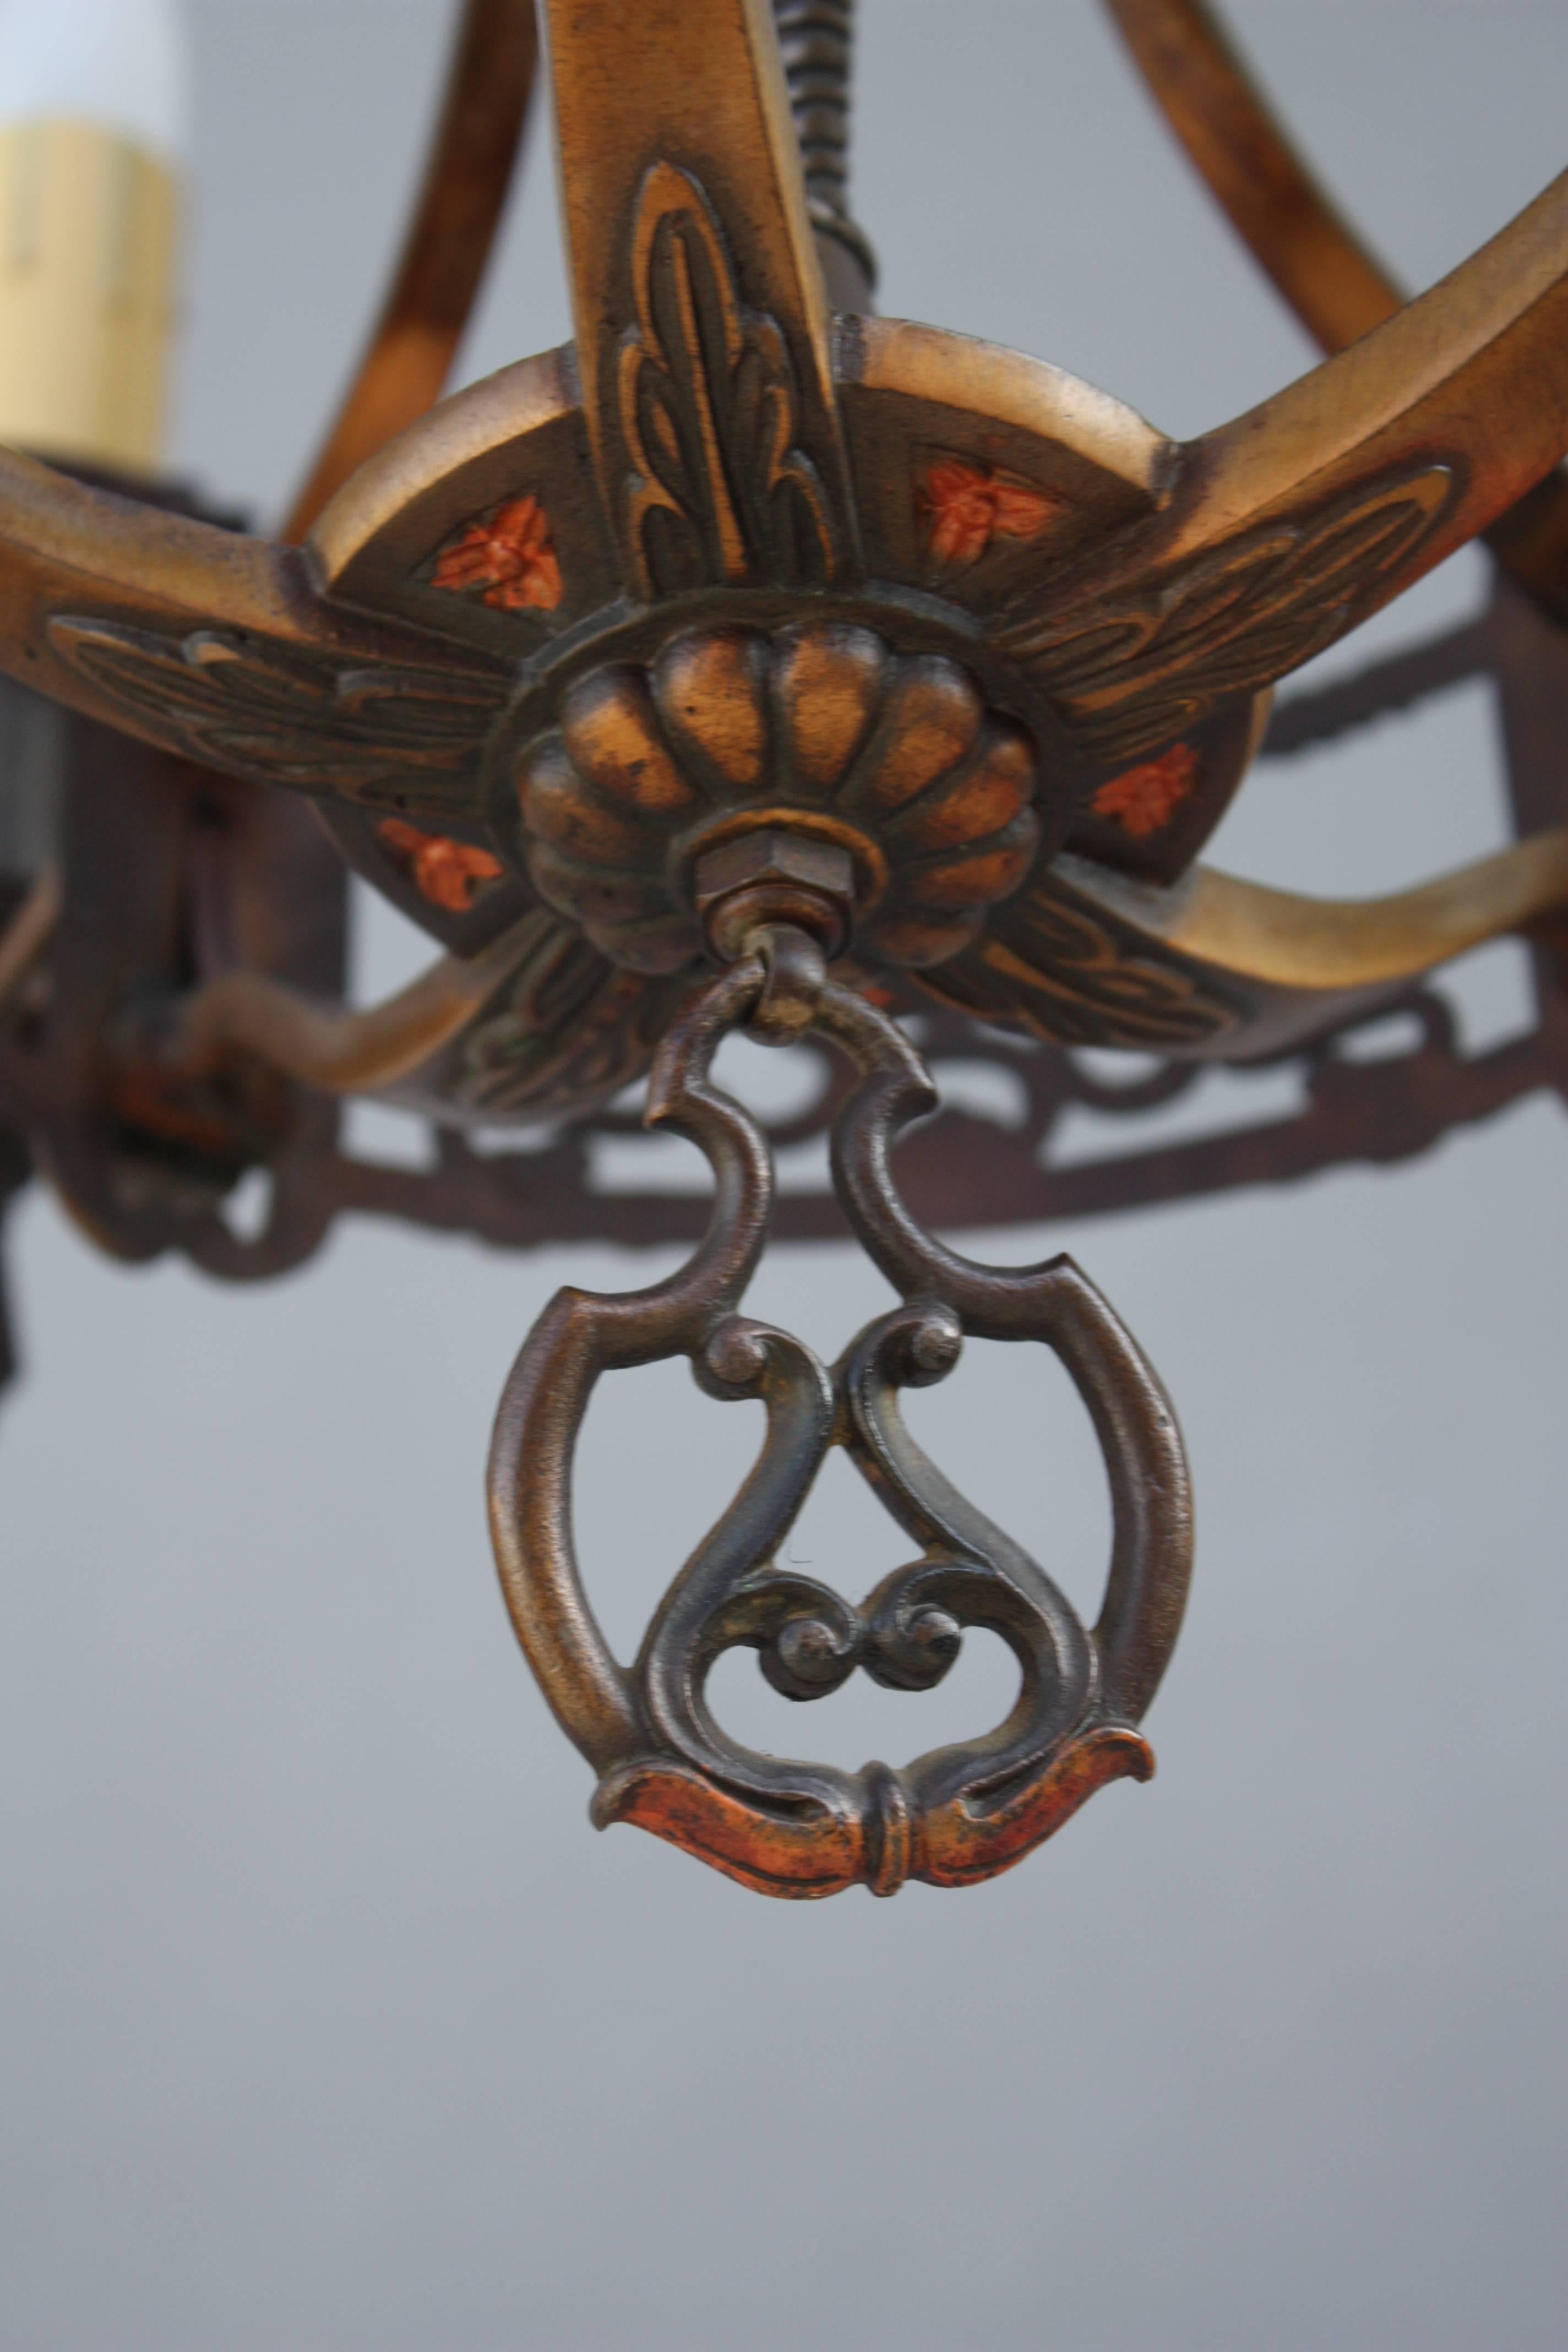 North American Classic Bronze Spanish Revival Chandelier For Sale